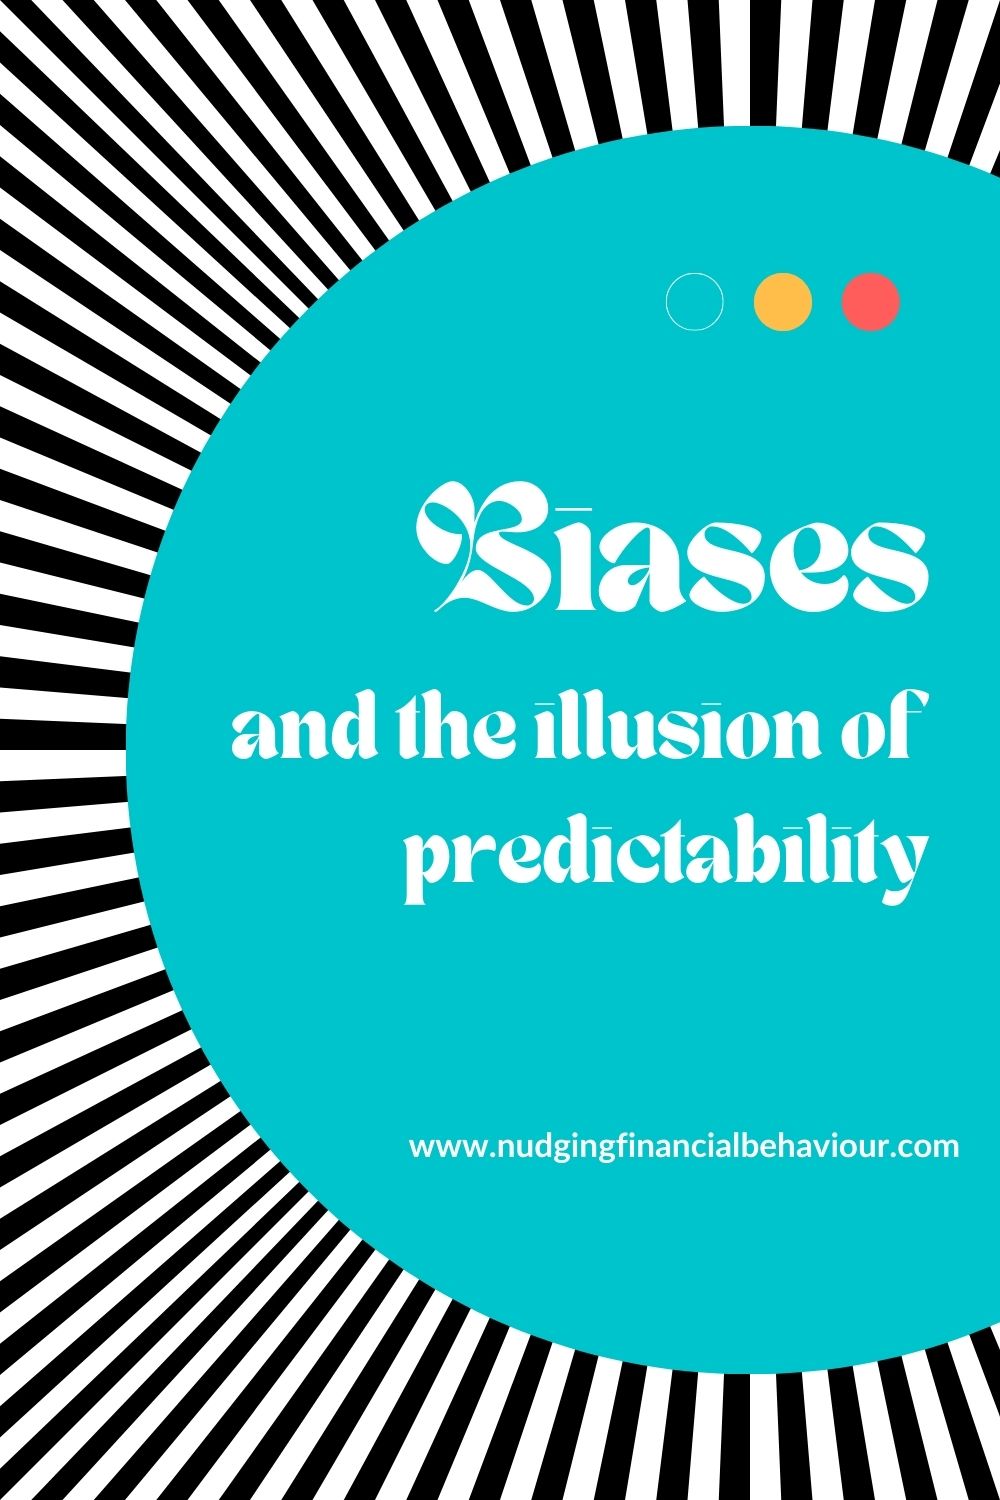 Biases and the illusion of predictability